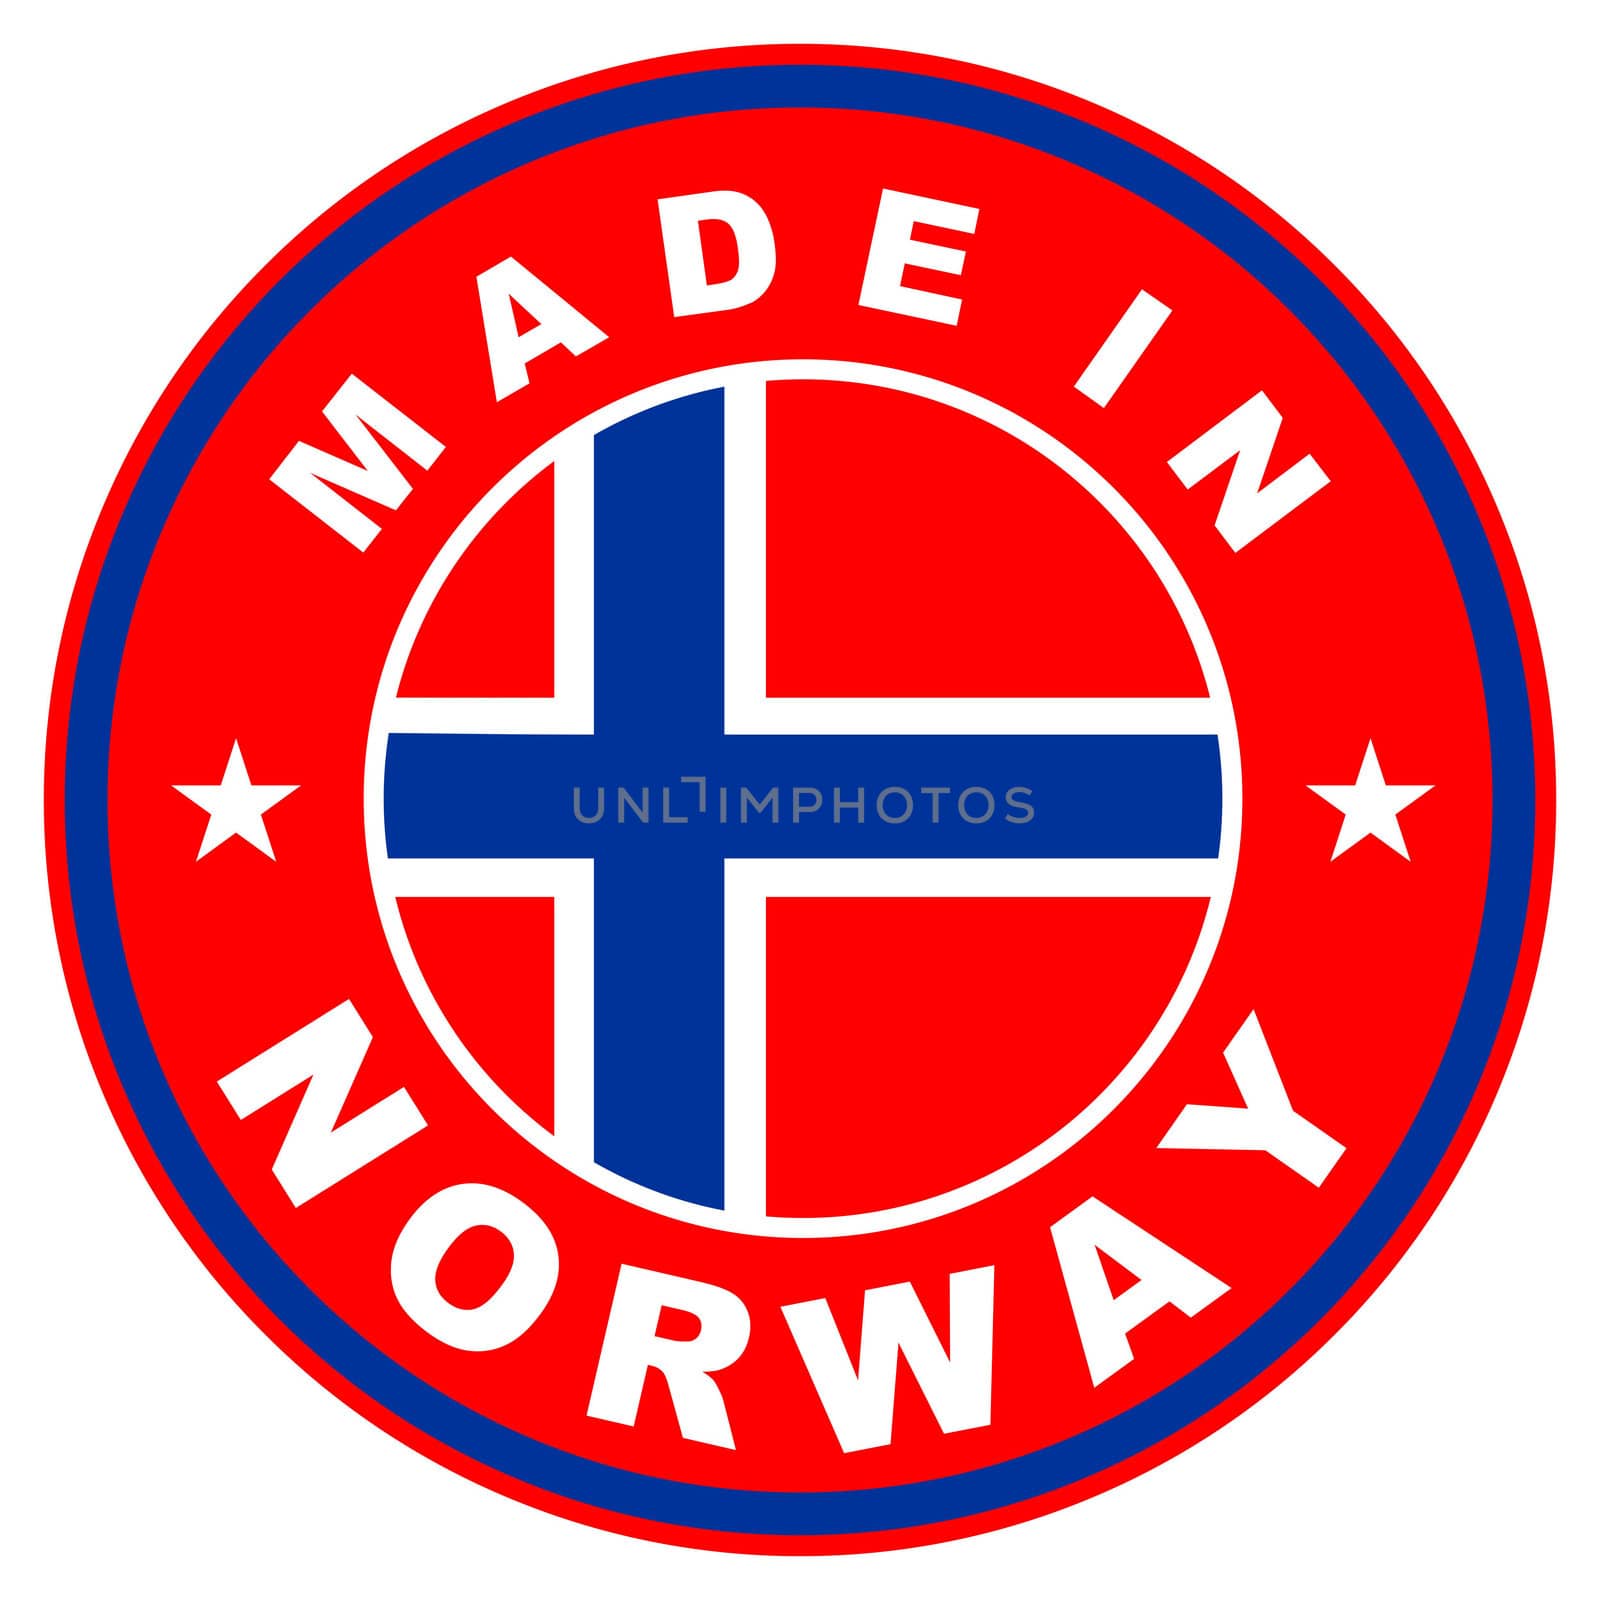 made in norway by tony4urban